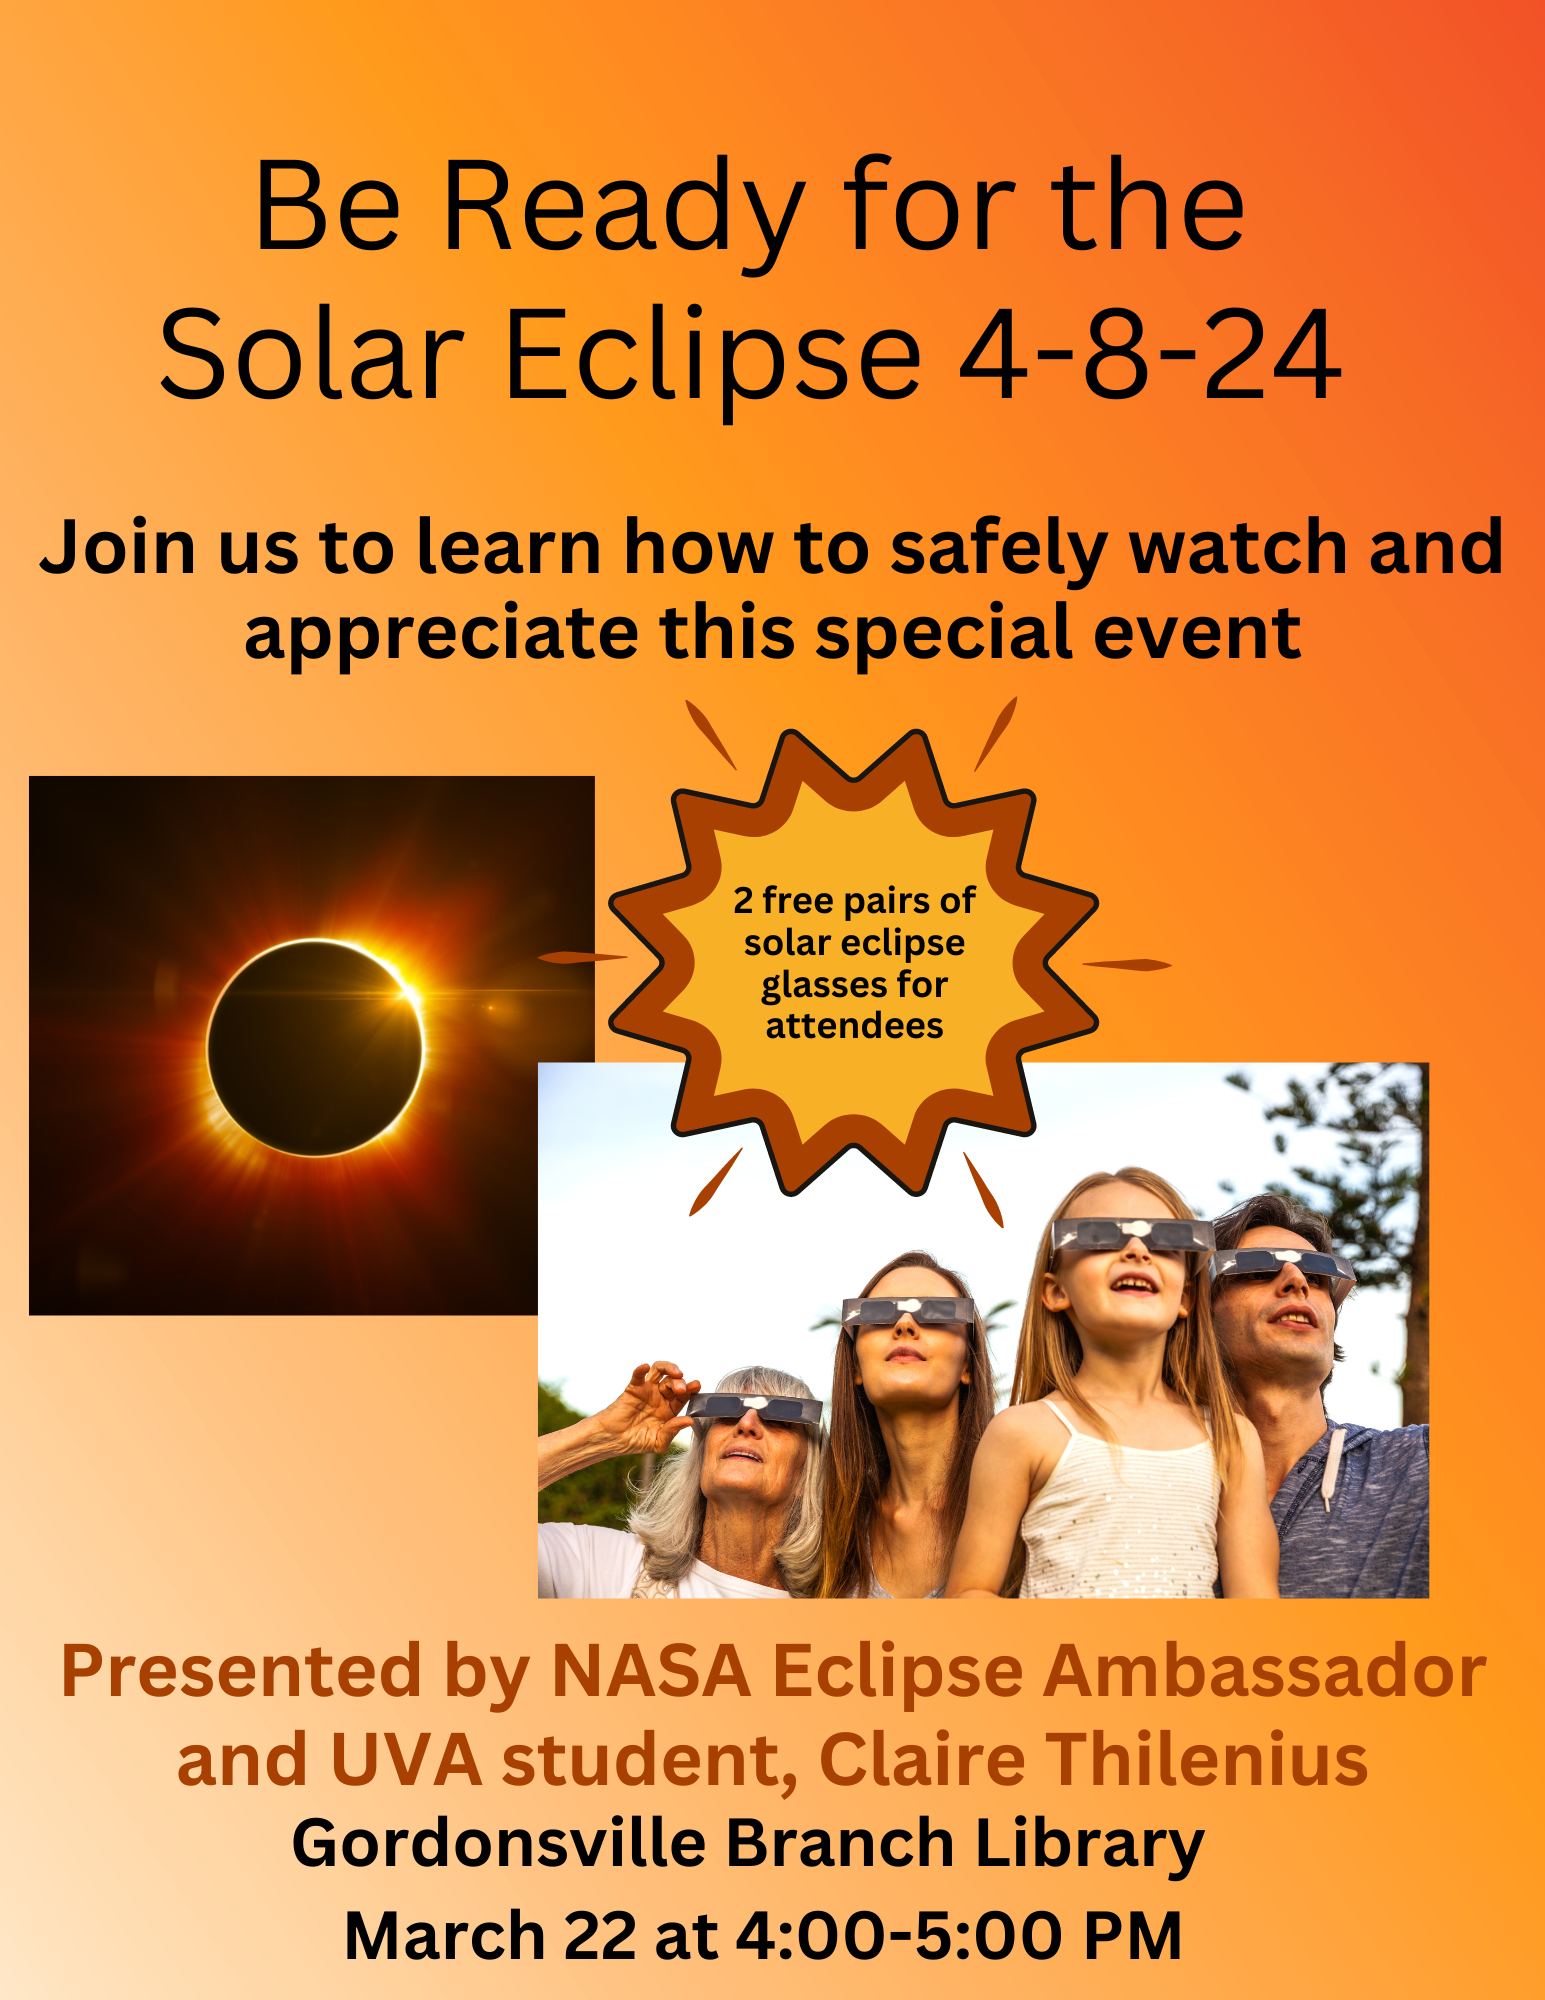 Solar eclipse program flyer: Be ready for the solar eclipse 4-8-24. Join us to learn how to safely watch and appreciate this special event. Presented by NASA eclipse ambassador and UVA student Claire Thilenius. 2 free pairs of solar glasses will be given to attendees up to our max room capacity of 36.